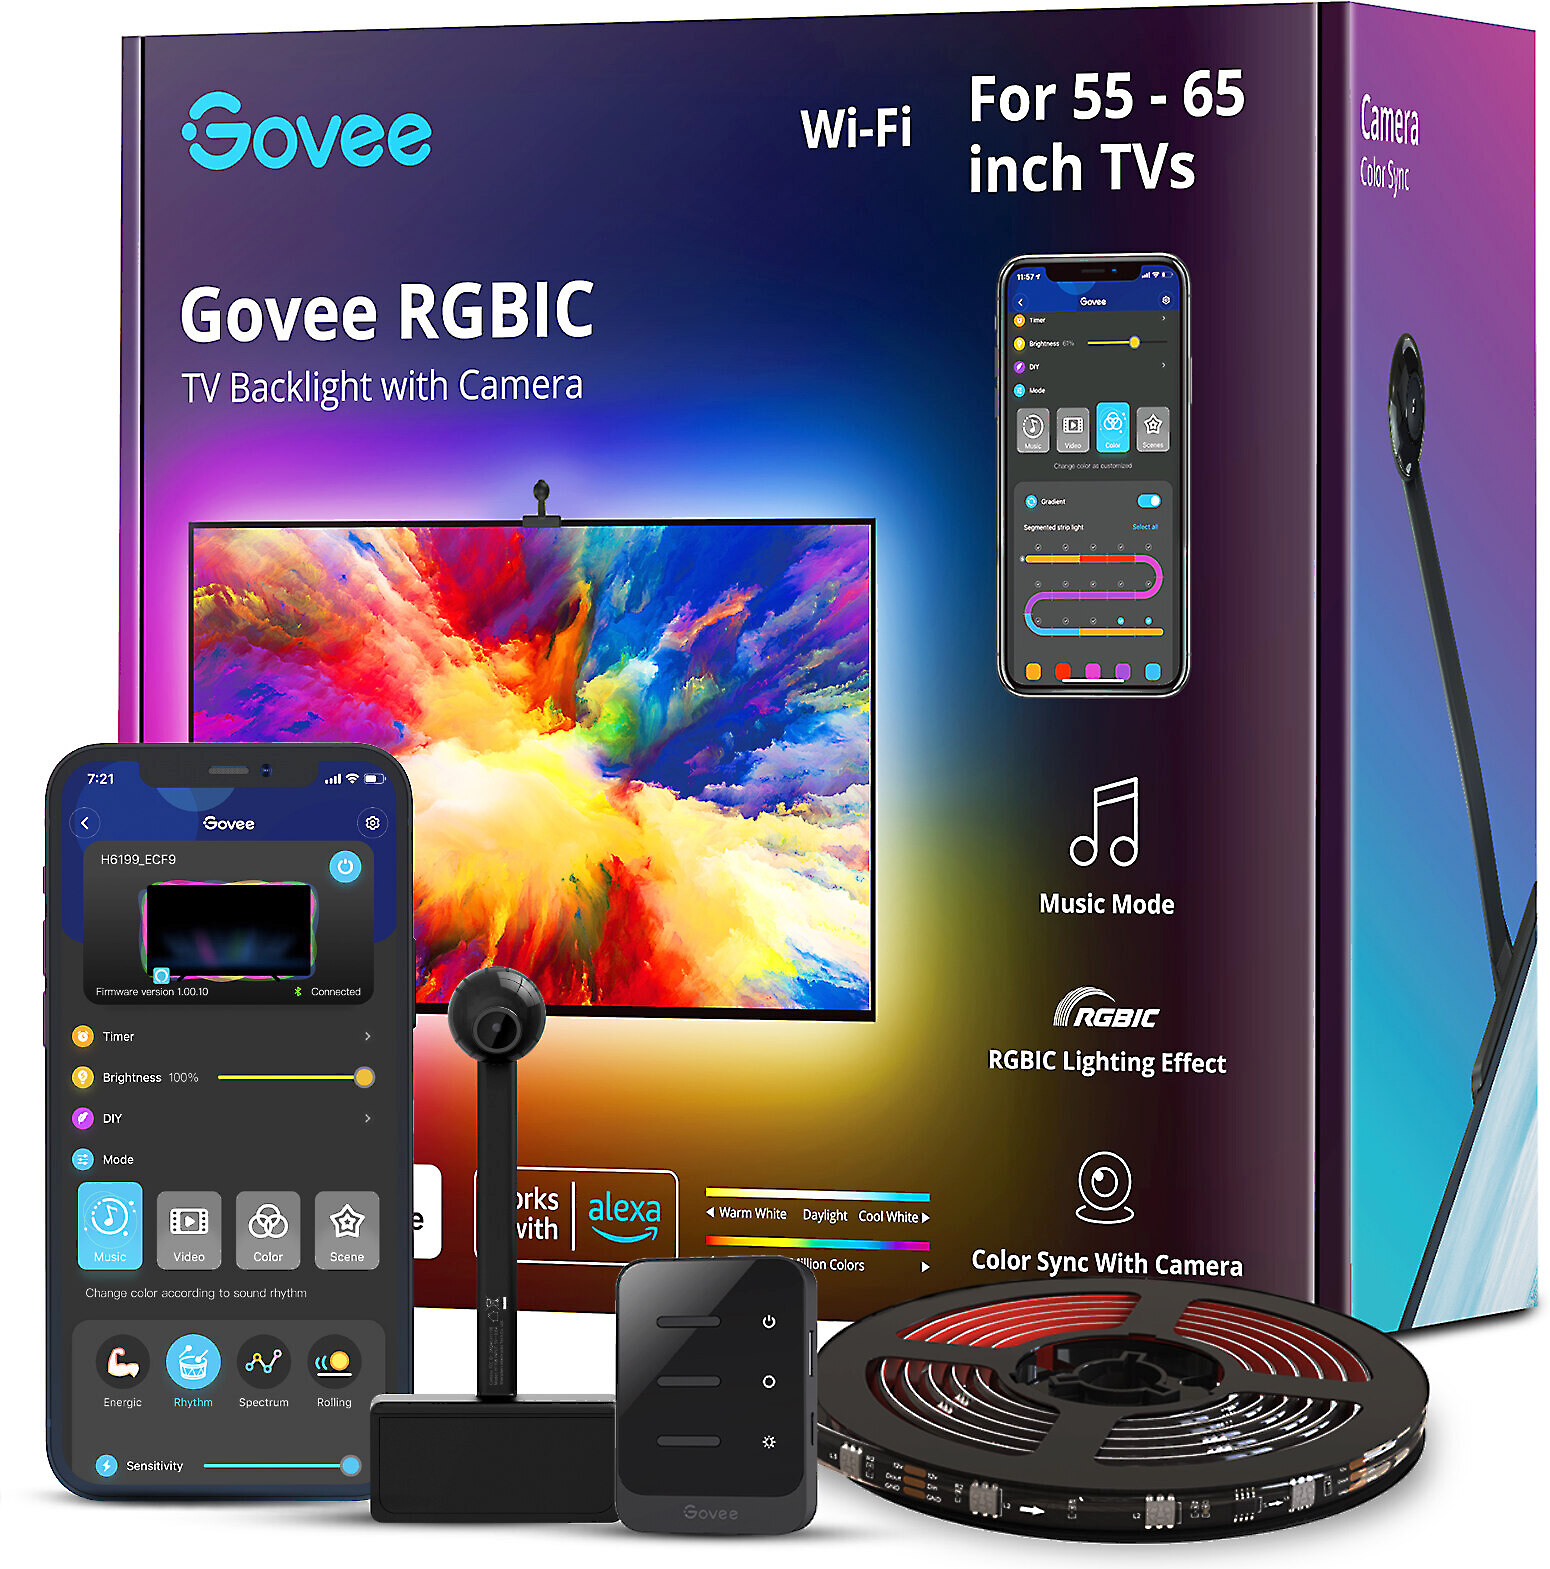 Govee TV Backlight (55-65 TVs) RGBIC LED backlight and camera system at  Crutchfield